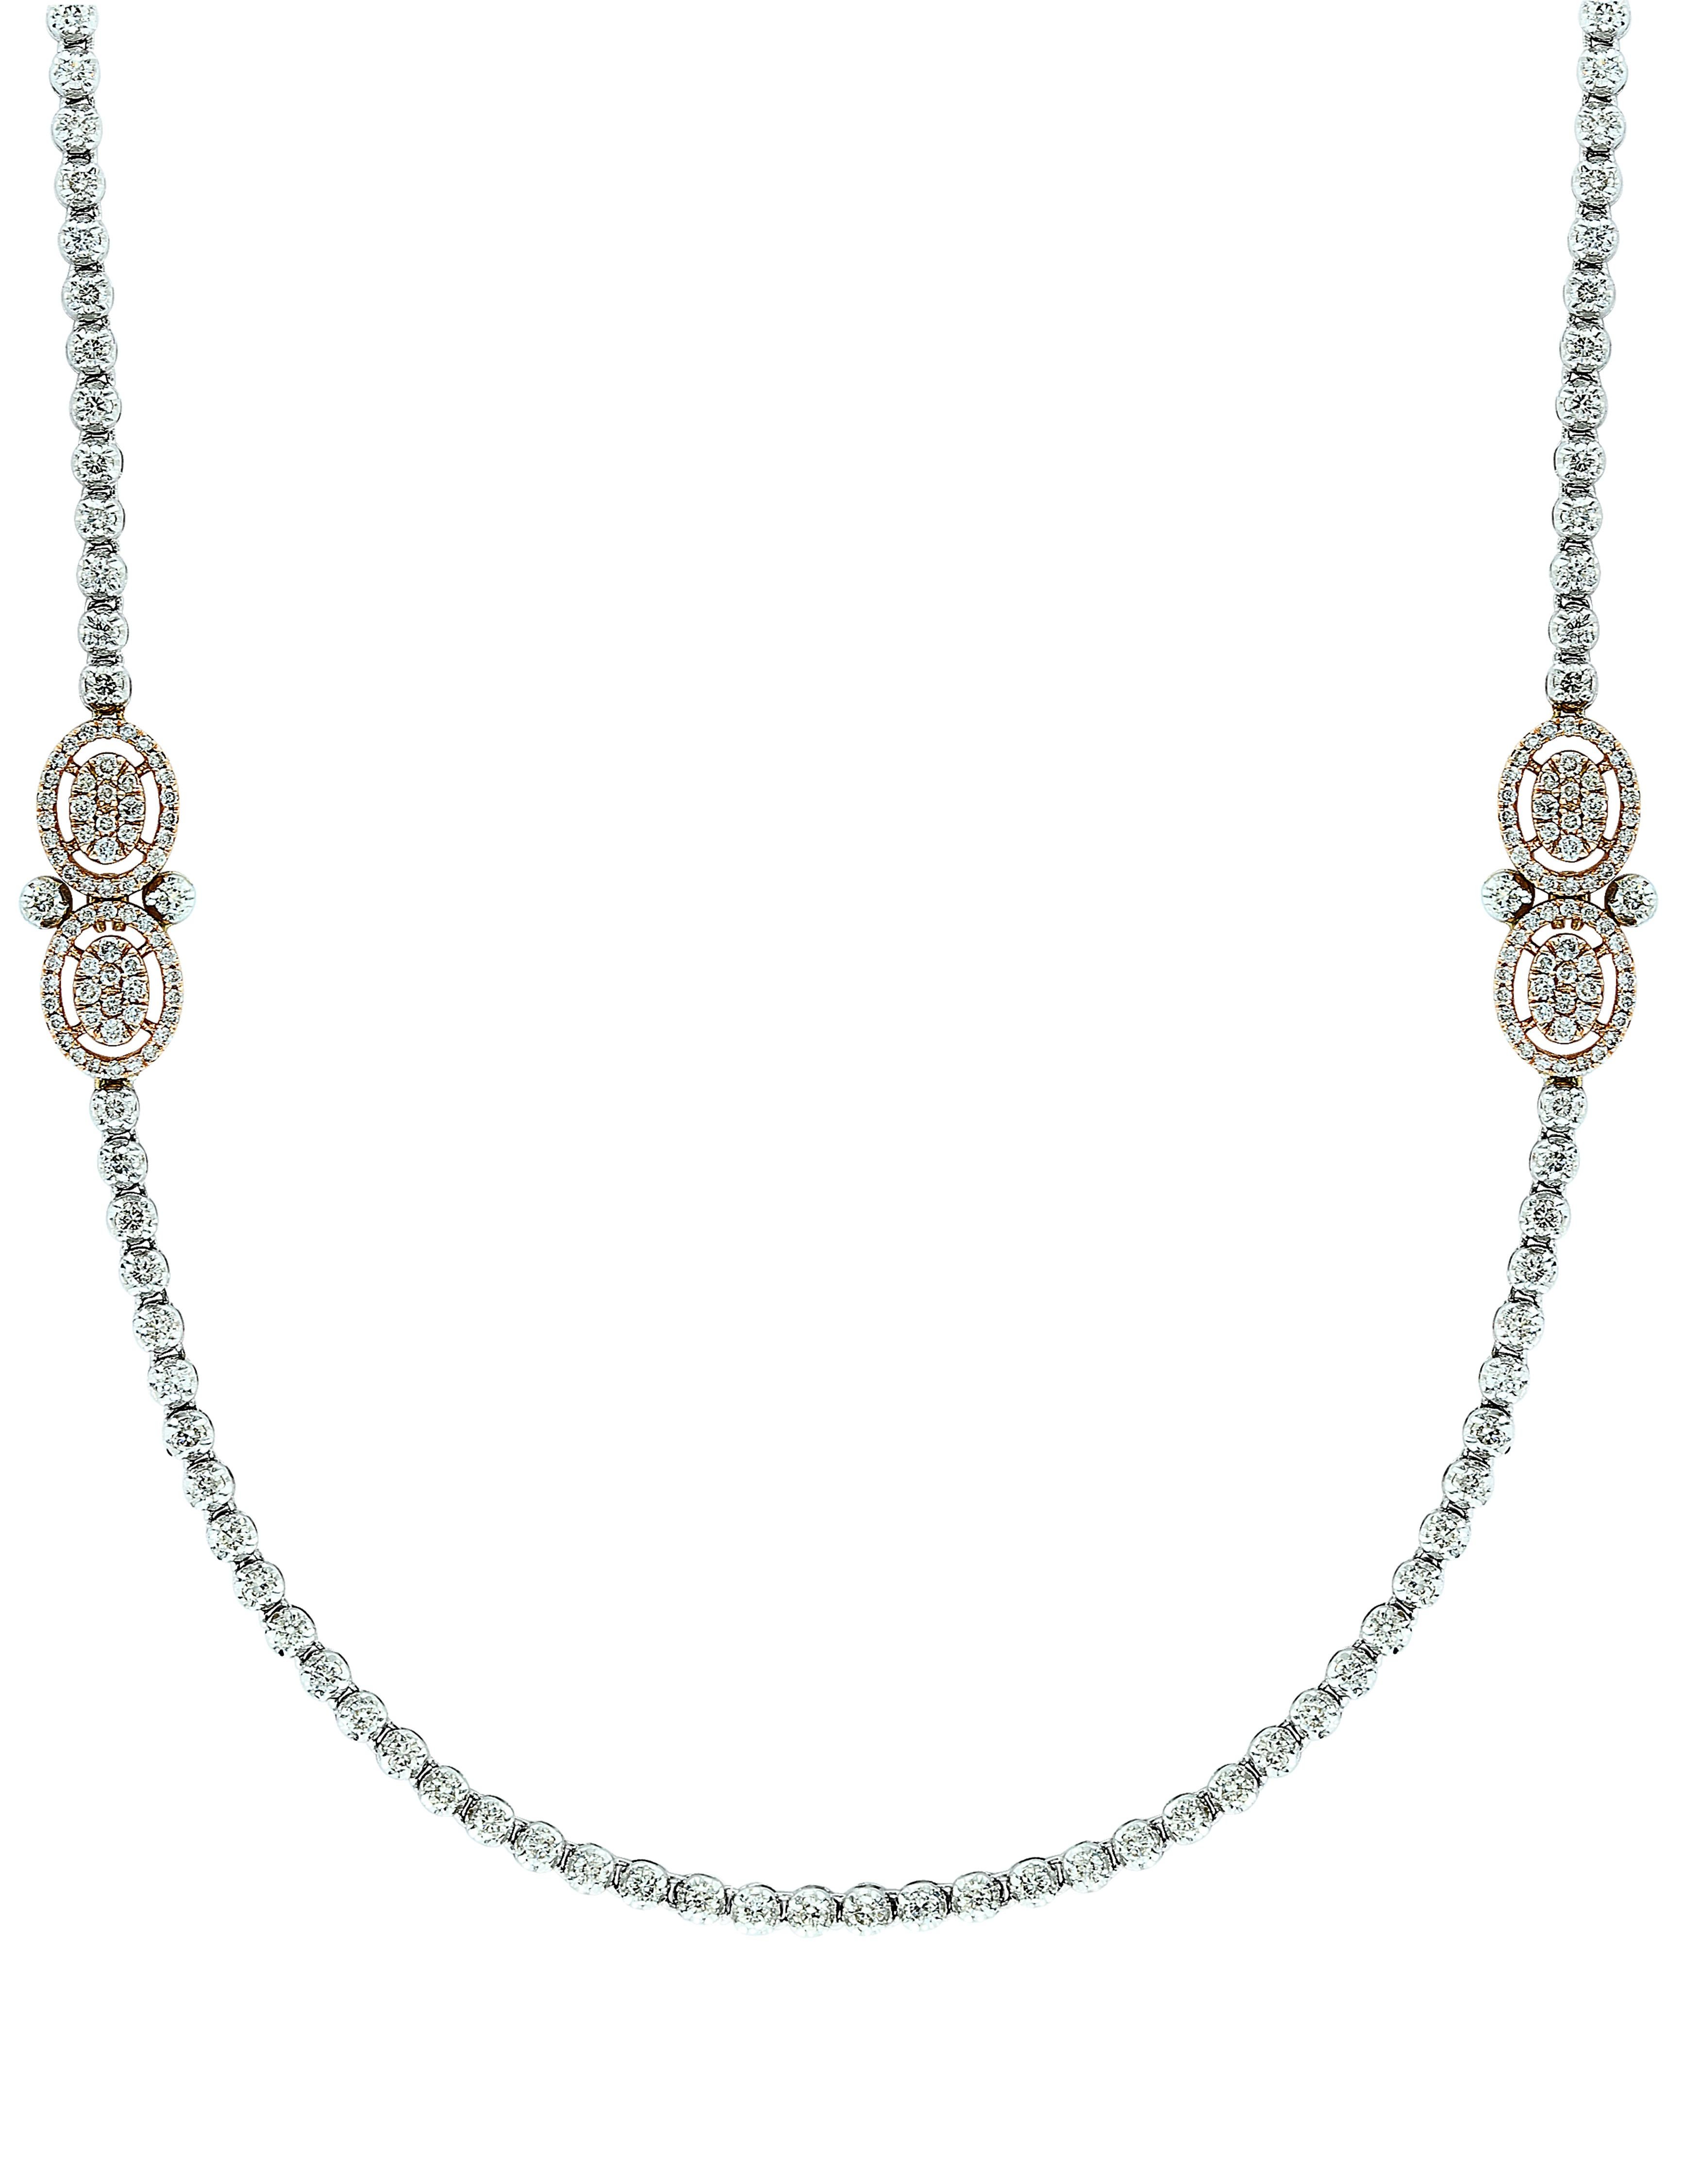 8 Ct Brilliant Cut Diamond Long Necklace in White & Pink 14 K Gold 27 Gm 1